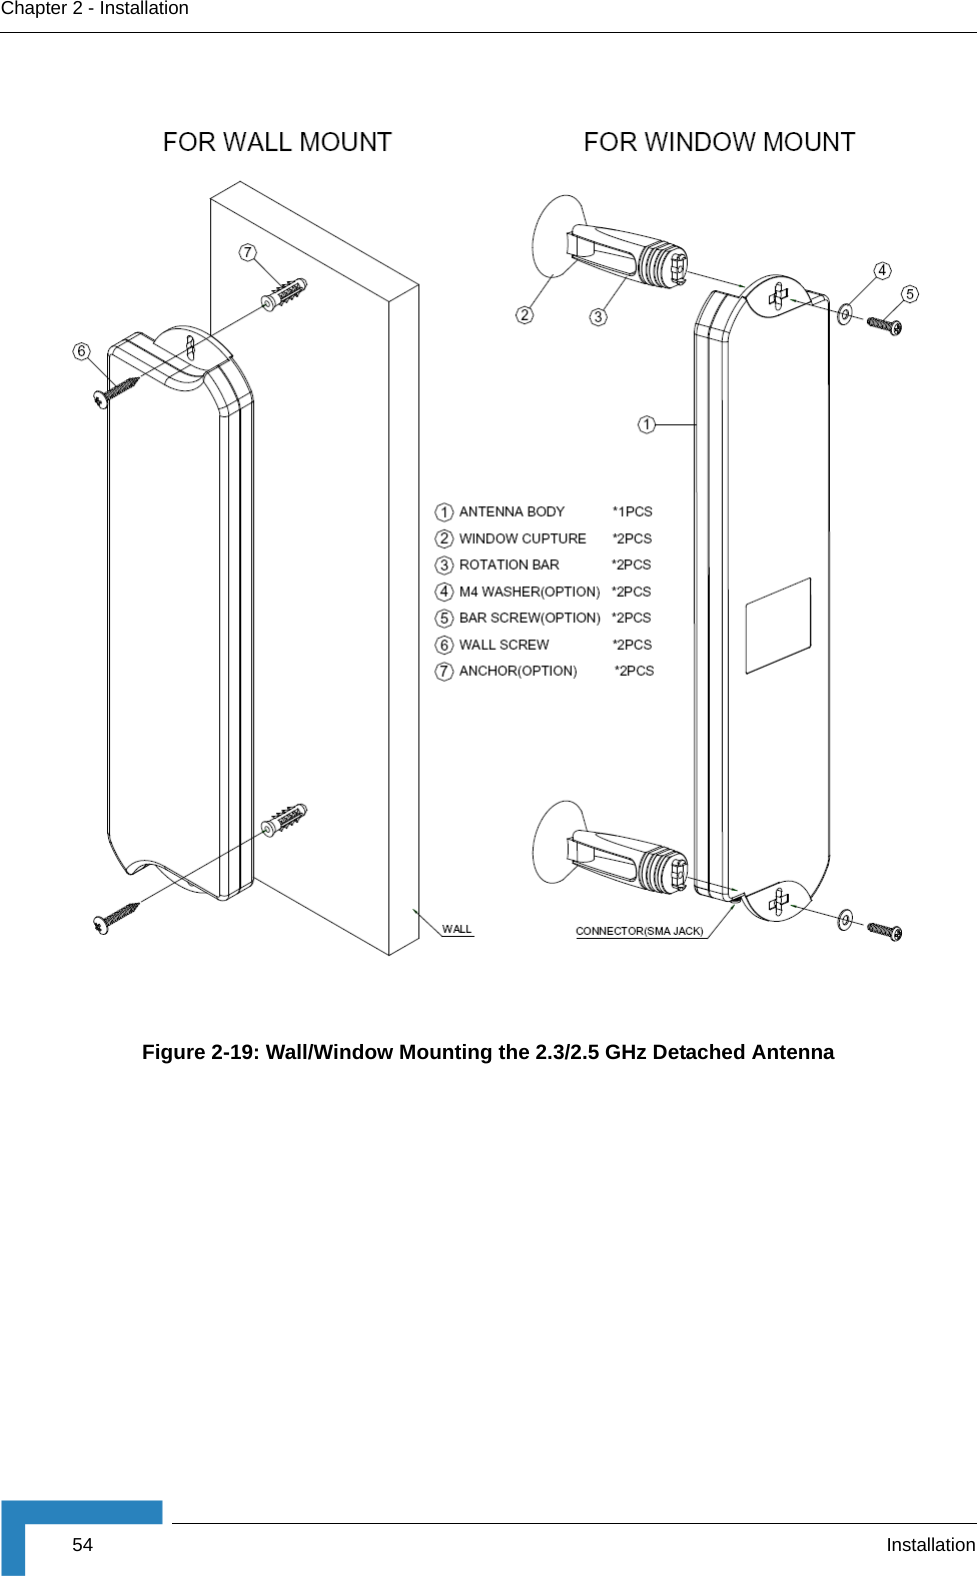 54 InstallationChapter 2 - InstallationFigure 2-19: Wall/Window Mounting the 2.3/2.5 GHz Detached Antenna